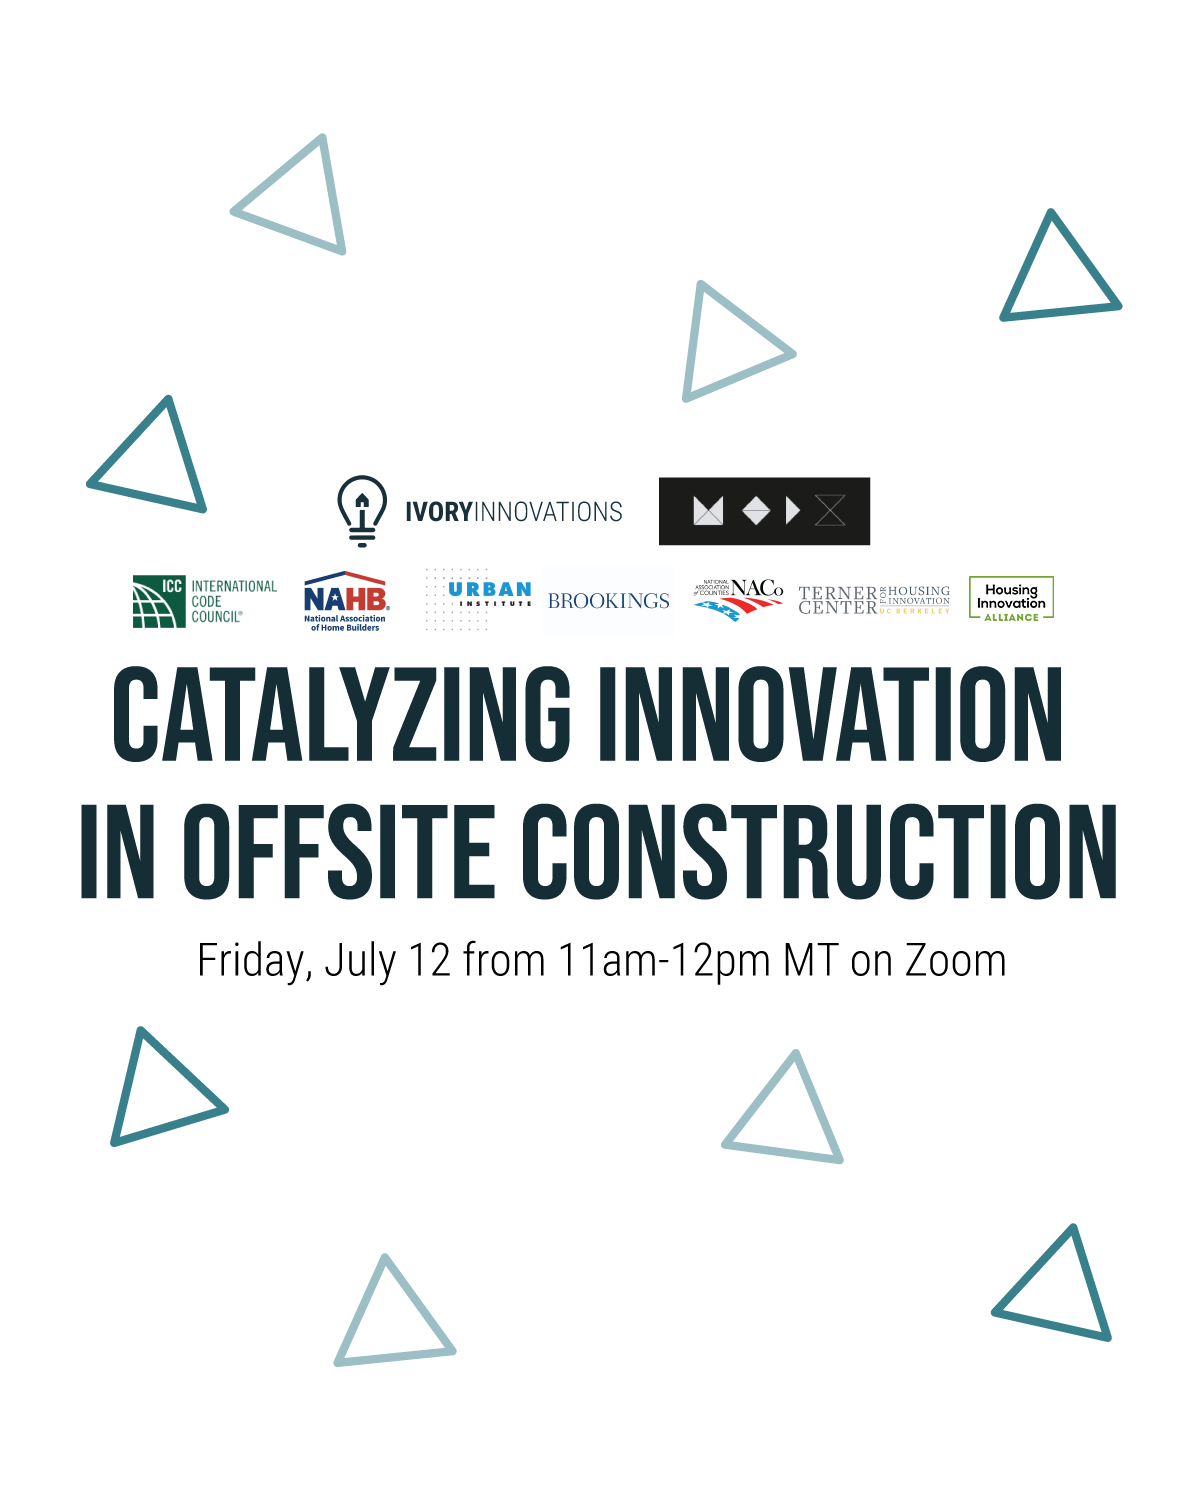 Catalyzing Innovation in Offsite Construction